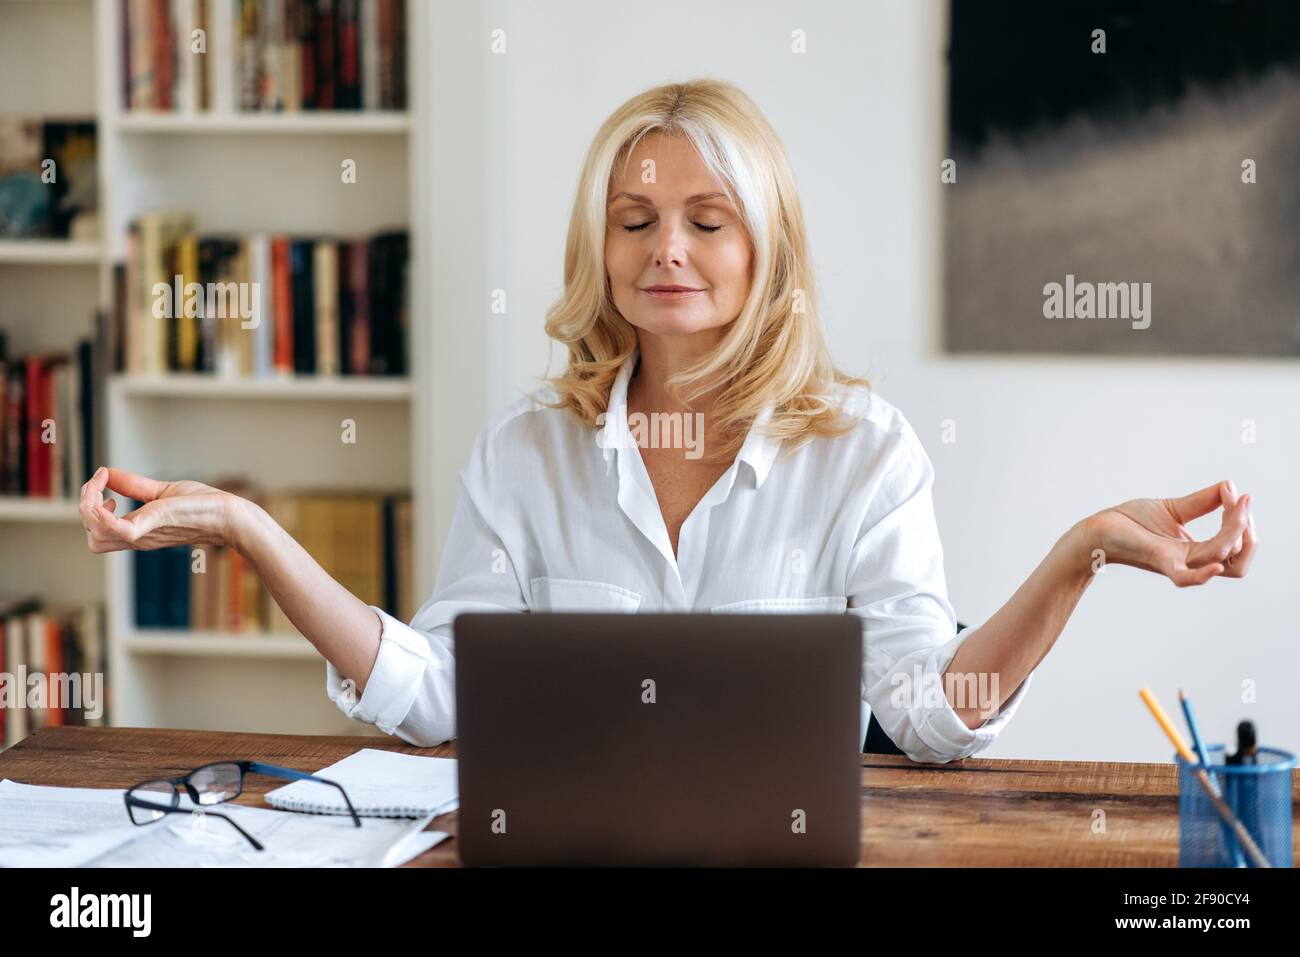 Break during work. Confident mature blonde, business lady or lawyer, wearing a white shirt, sitting at a work desk, took a break from computer work, meditates with eyes closed Stock Photo